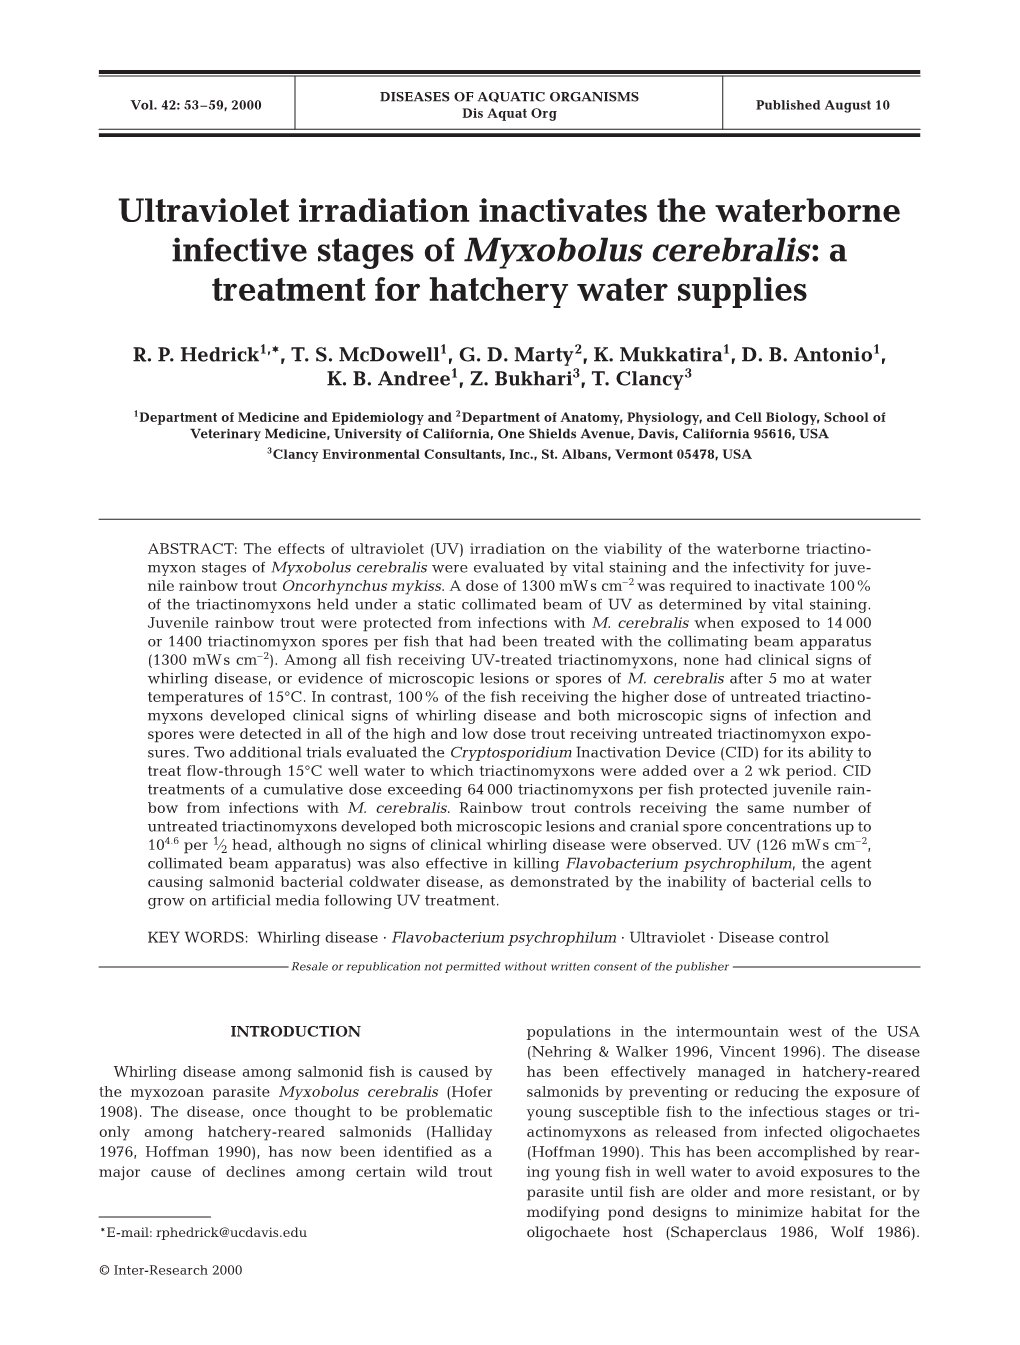 Ultraviolet Irradiation Inactivates the Waterborne Infective Stages of Myxobolus Cerebralis: a Treatment for Hatchery Water Supplies